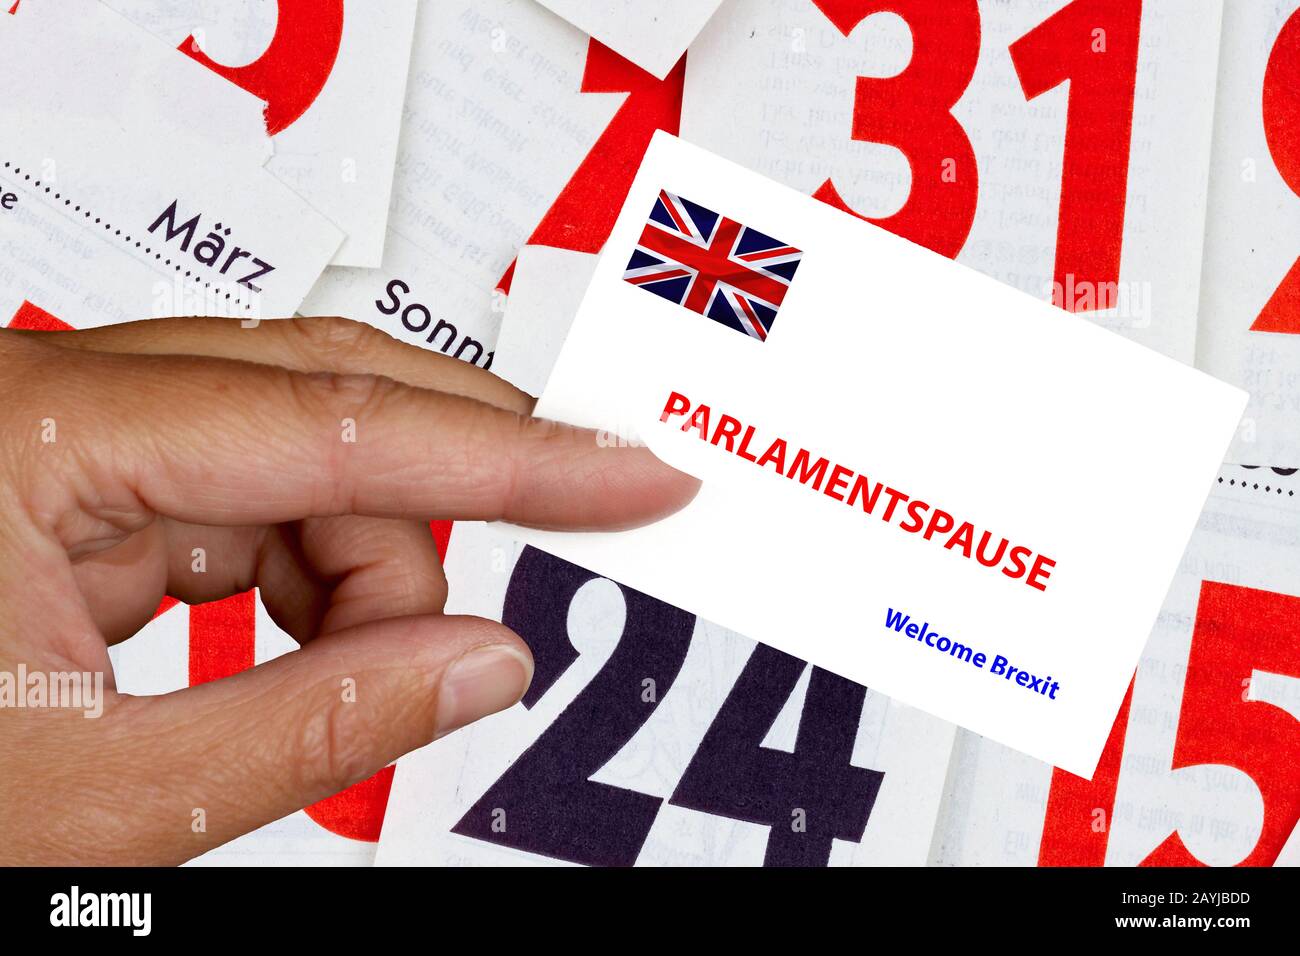 hand holding calling card with Union Jack lettering Parlamentspause, break of parliament, Welcome Brexit, composing, United Kingdom, England Stock Photo